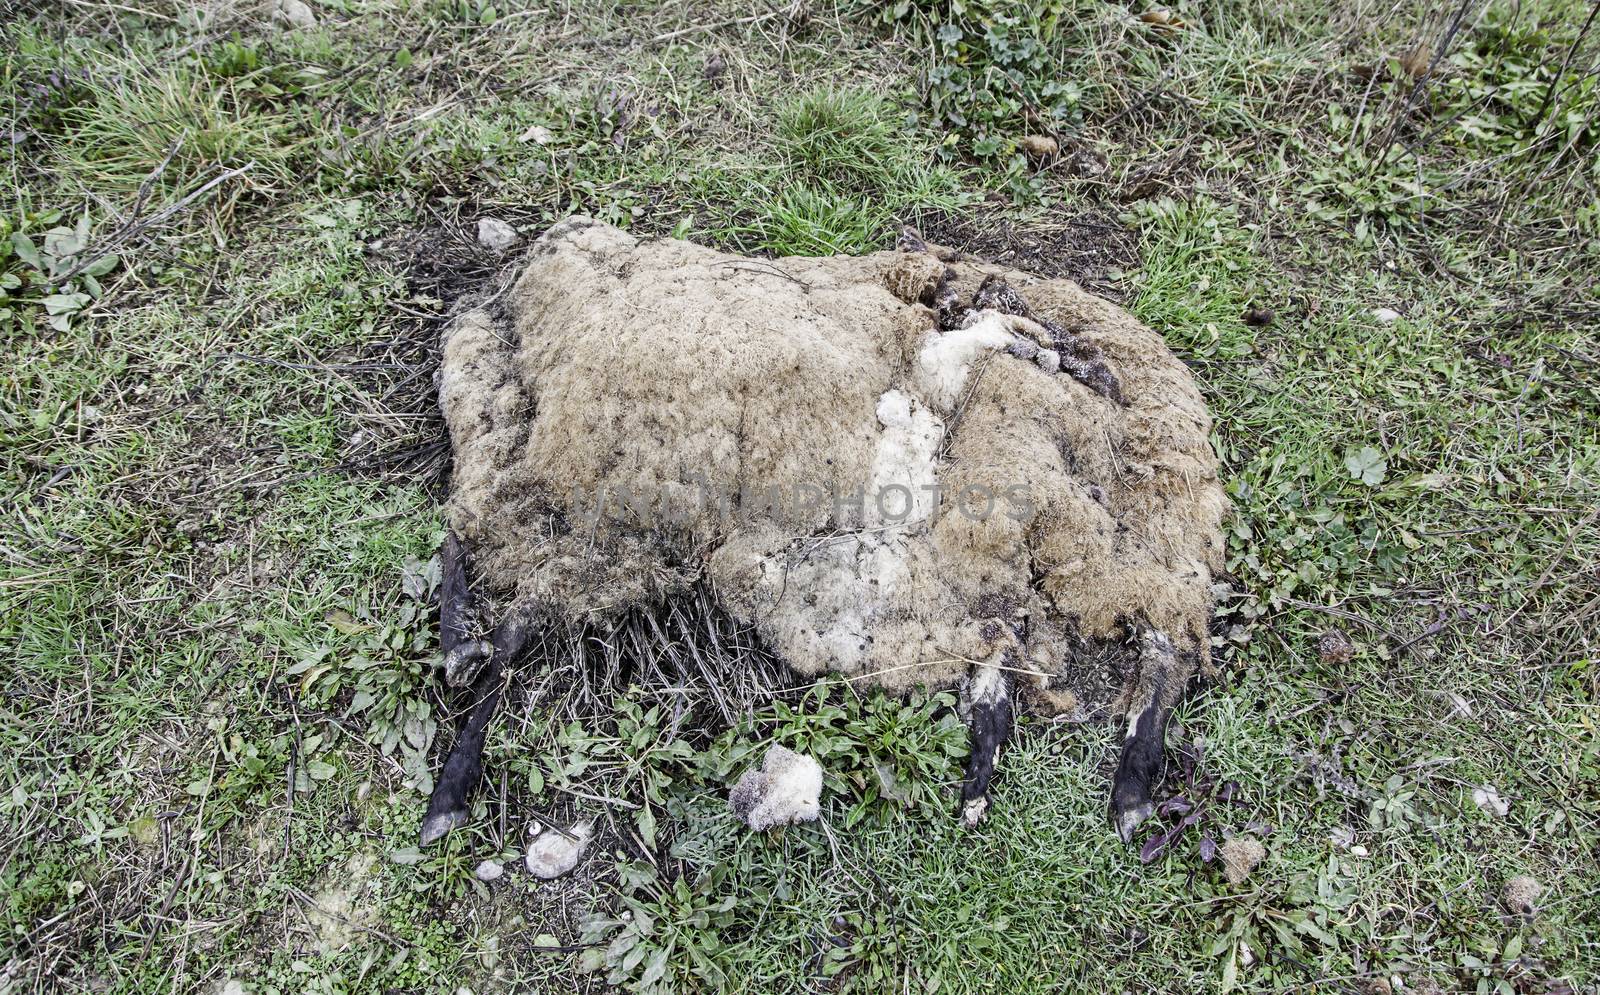 Dead sheep in the field, detail of an animal in decomposition